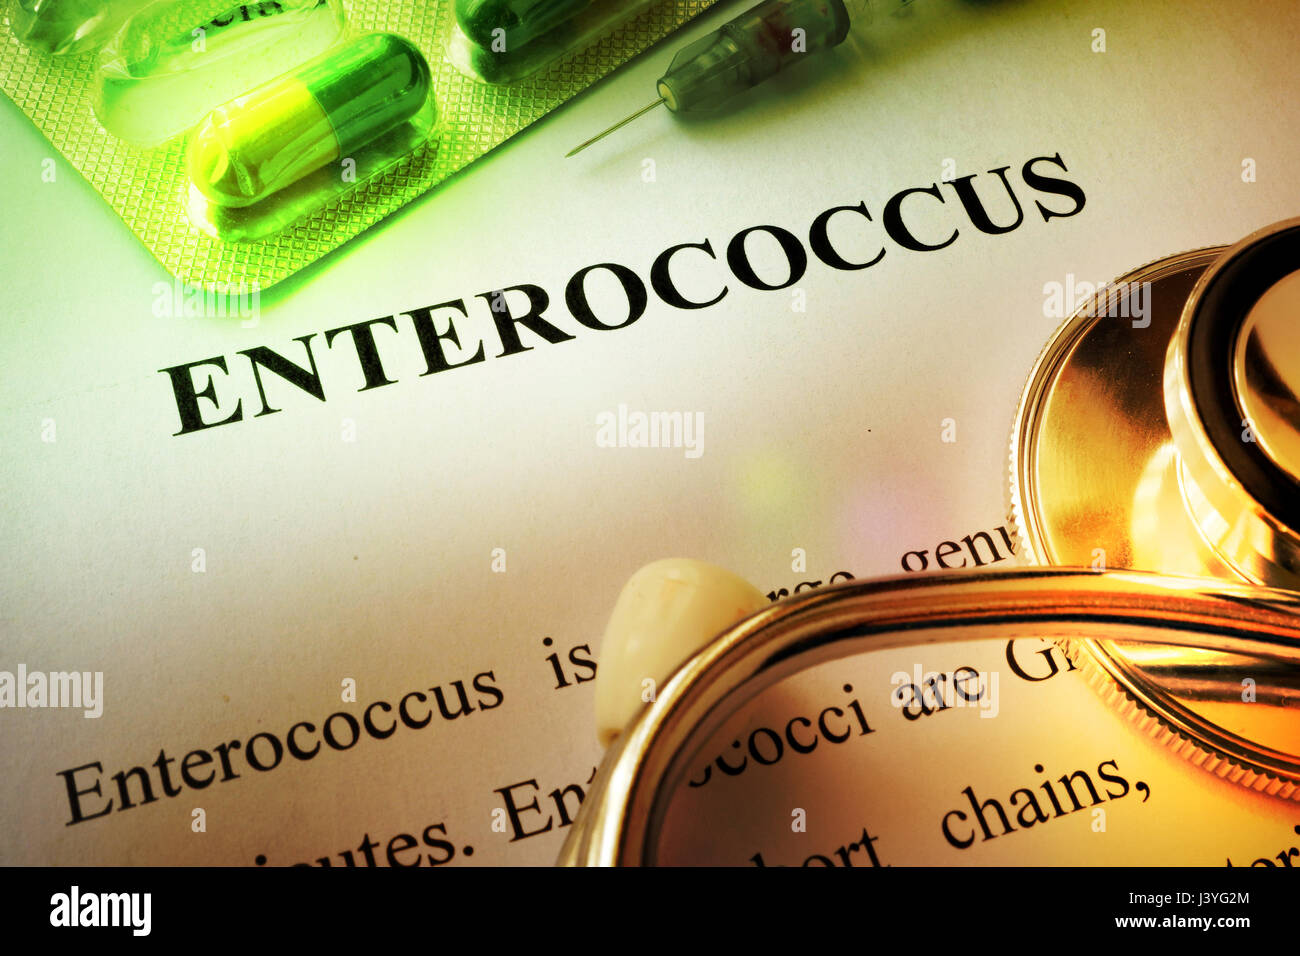 Page of book with title Enterococcus infection. Stock Photo